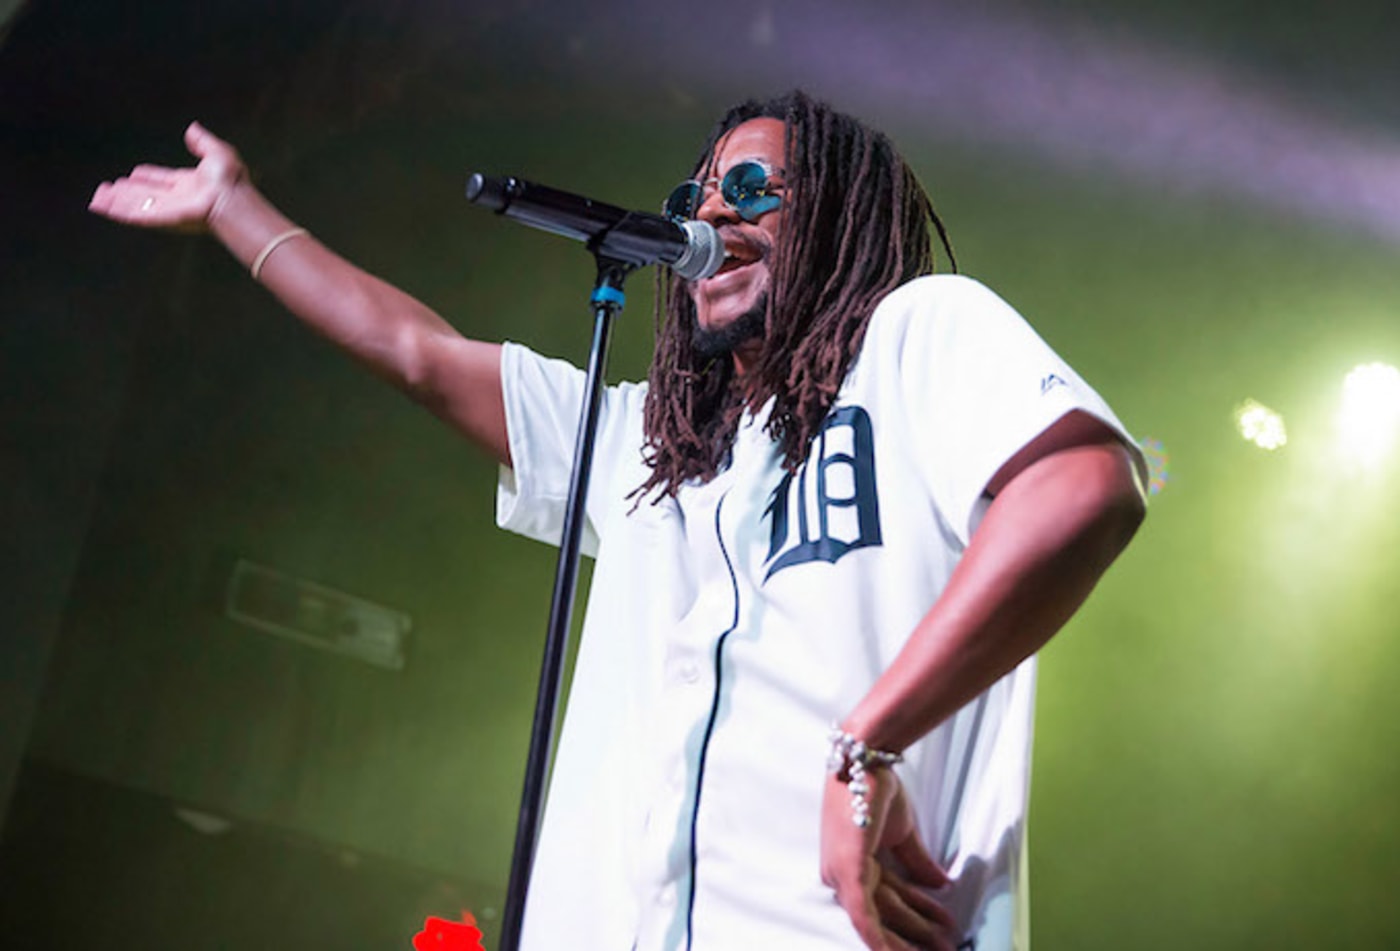 Lupe Fiasco performing in Detroit